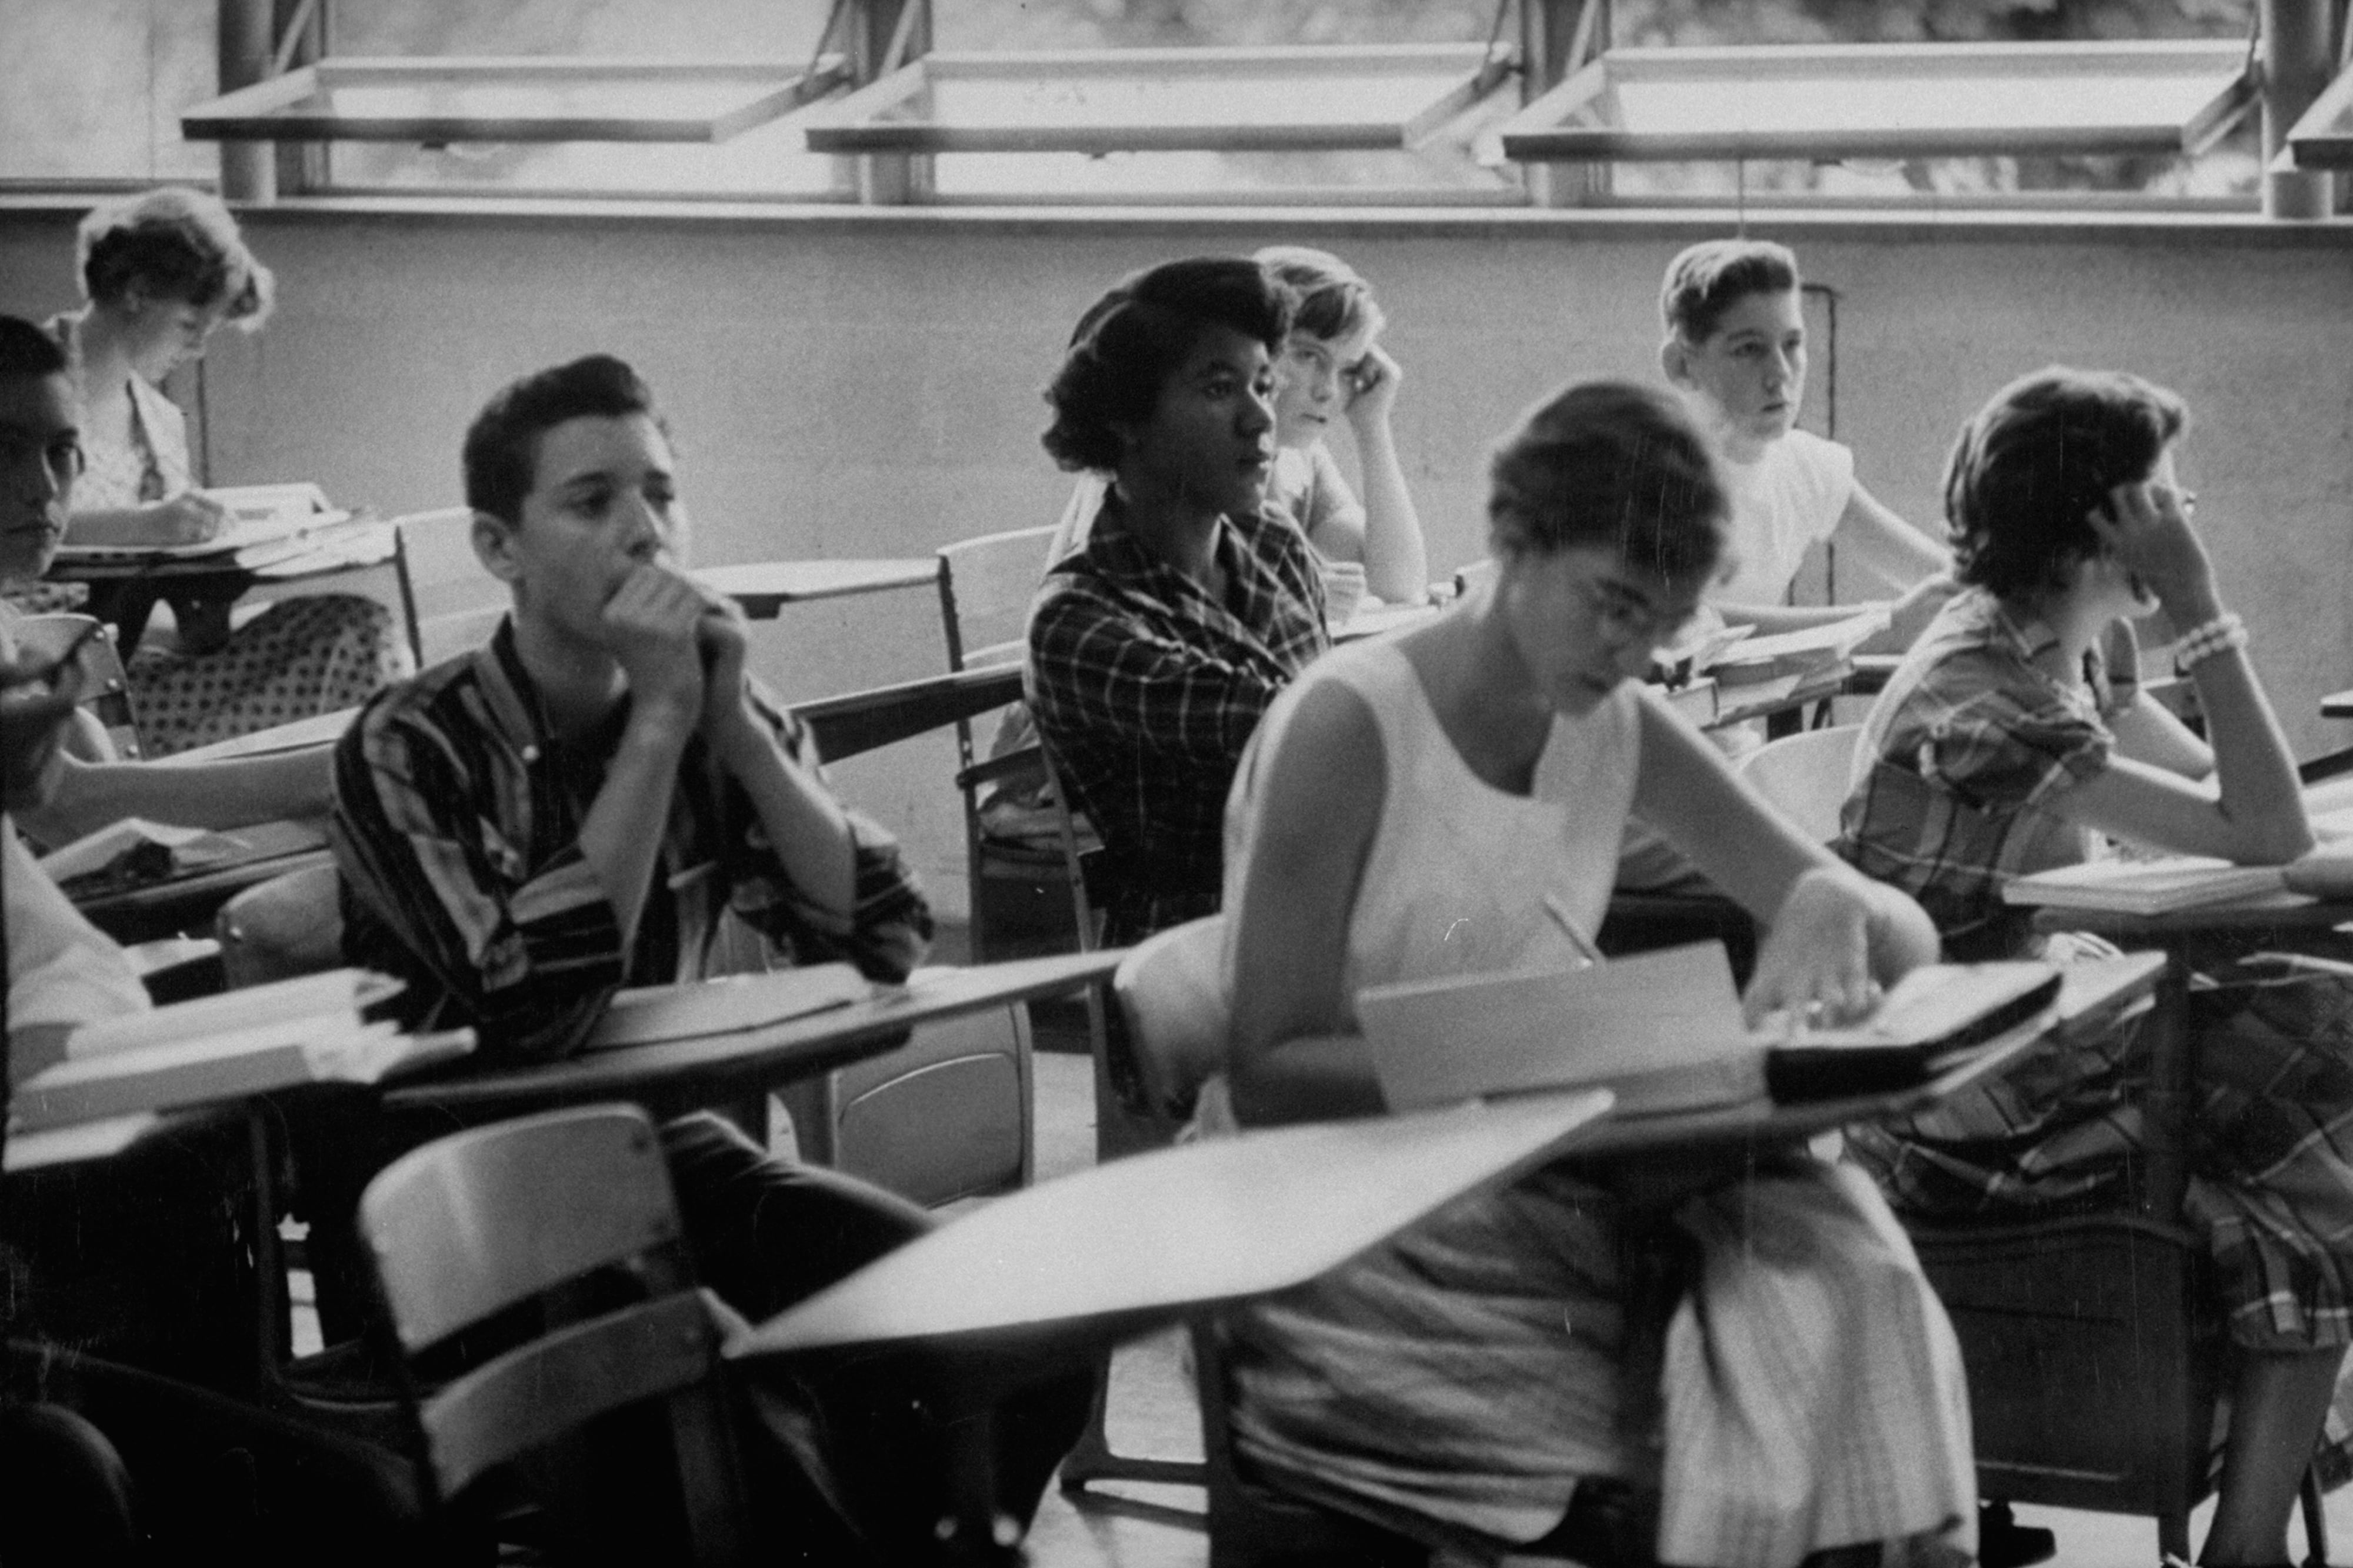 In this historic black and white photograph, one young Black woman sits in the middle of a high school class alongside several white students, after the school was desegregated in Tennessee.